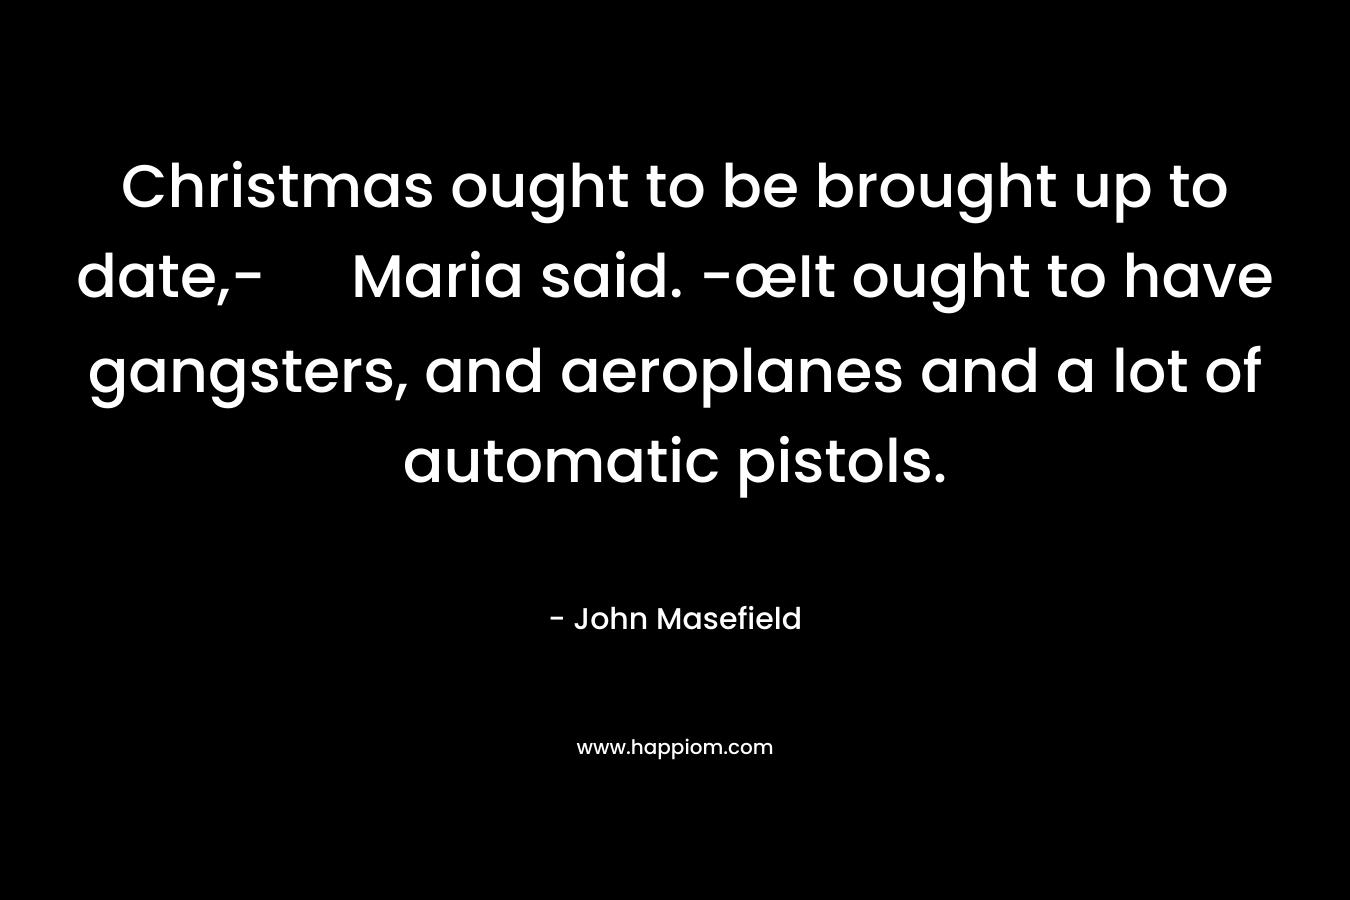 Christmas ought to be brought up to date,- Maria said. -œIt ought to have gangsters, and aeroplanes and a lot of automatic pistols.